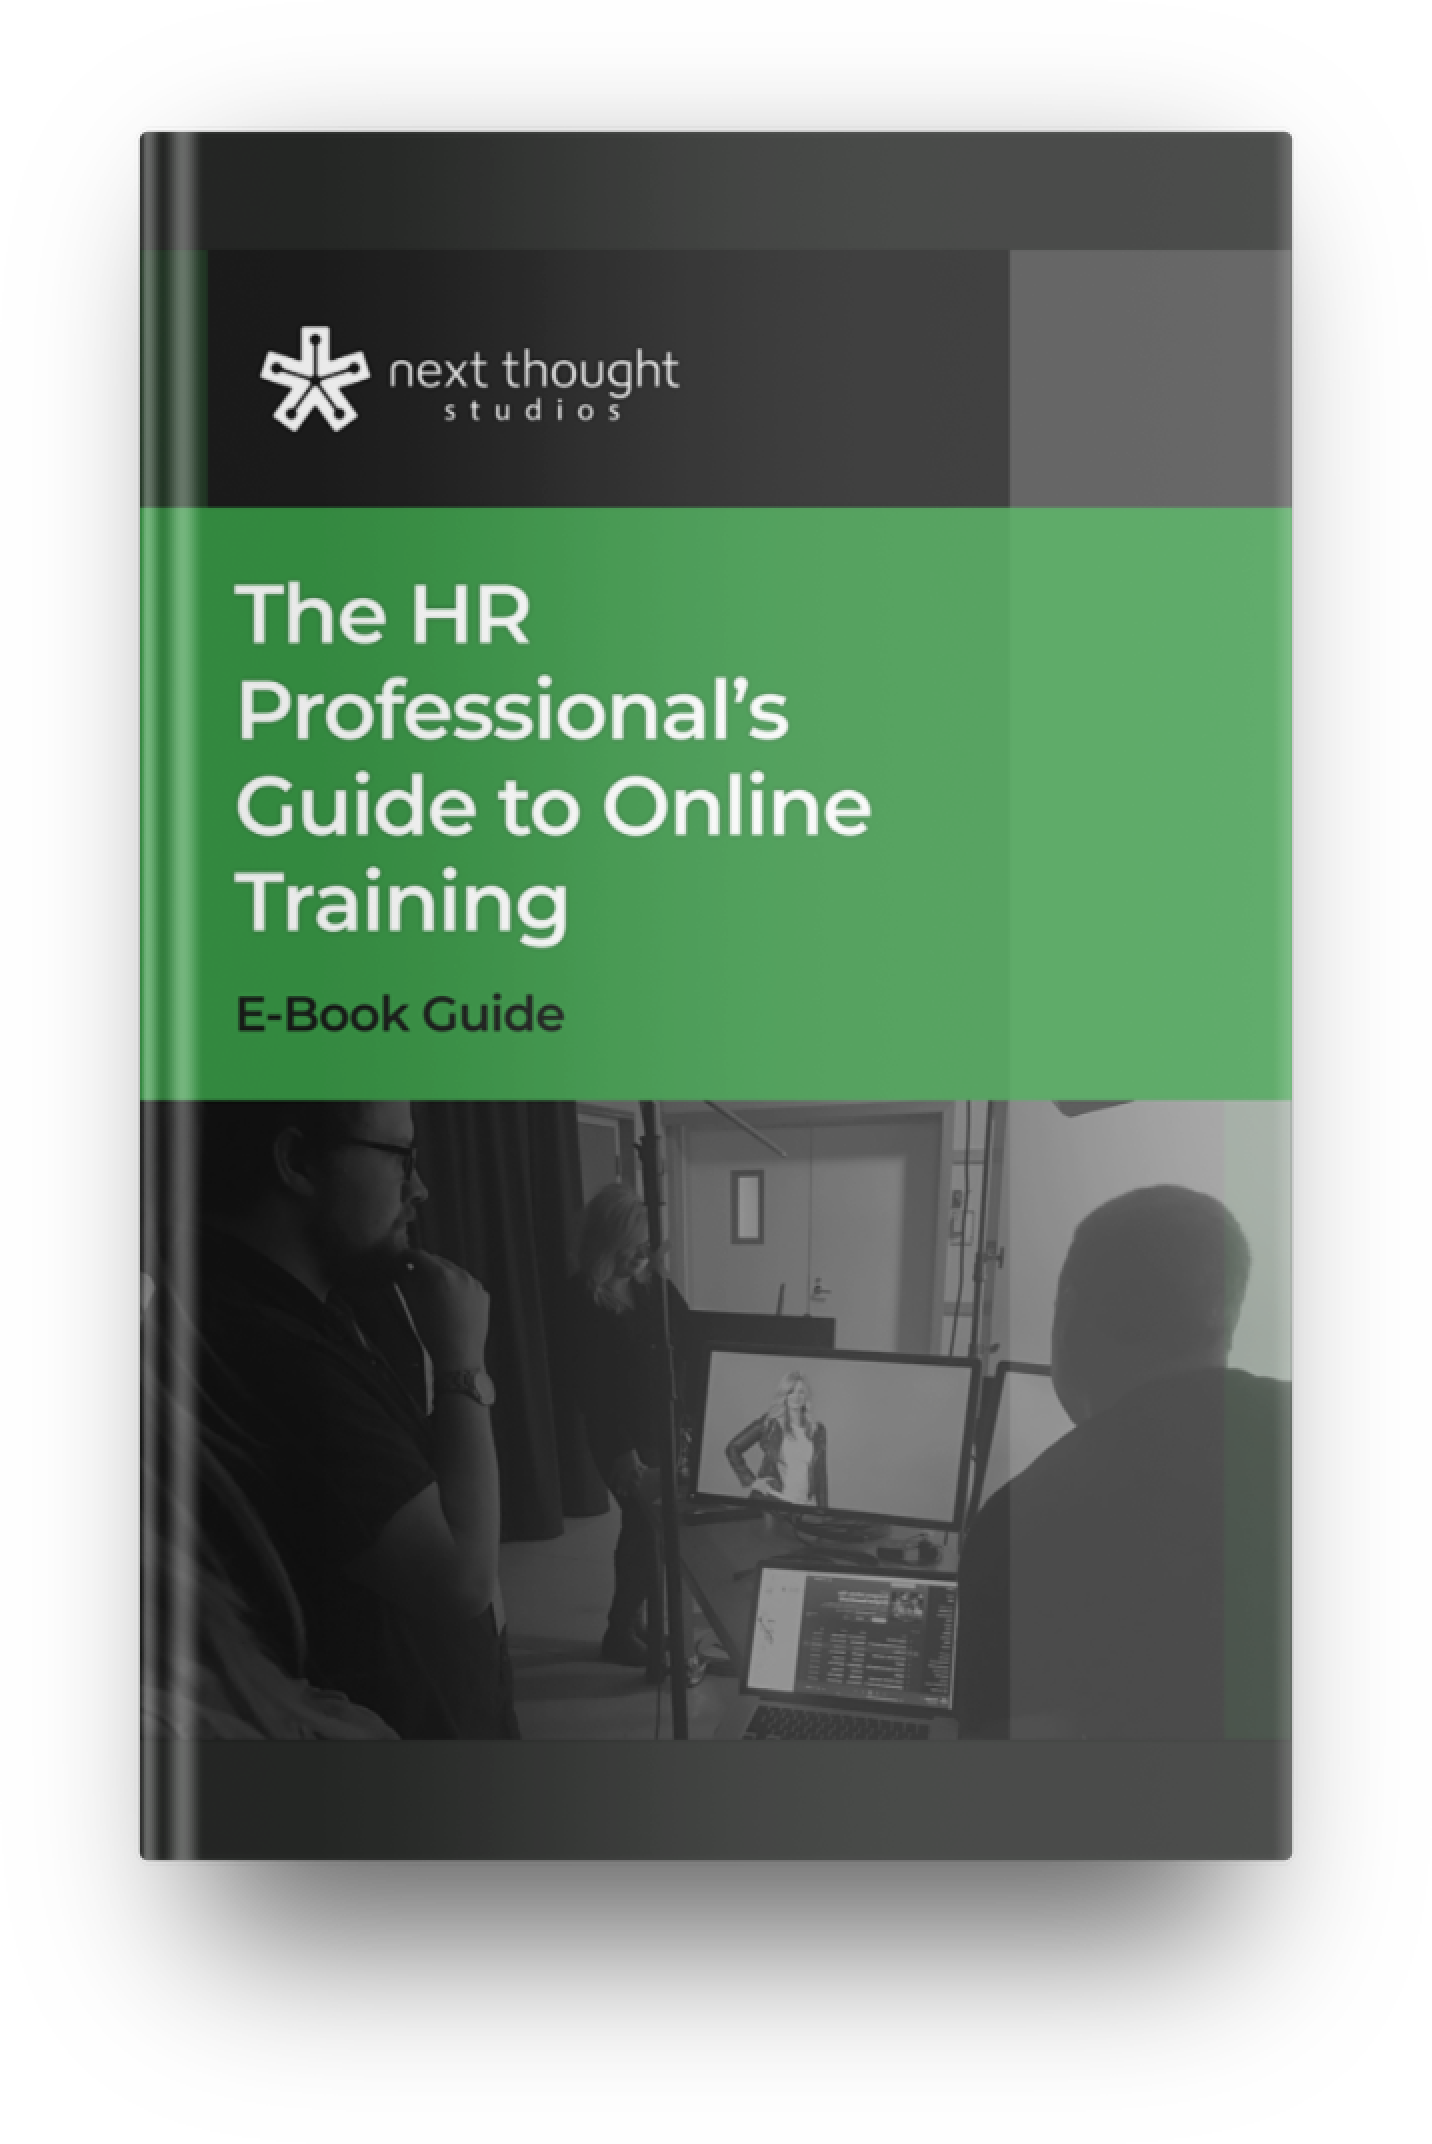 Mockup - The HR Professional’s Guide to Online Training